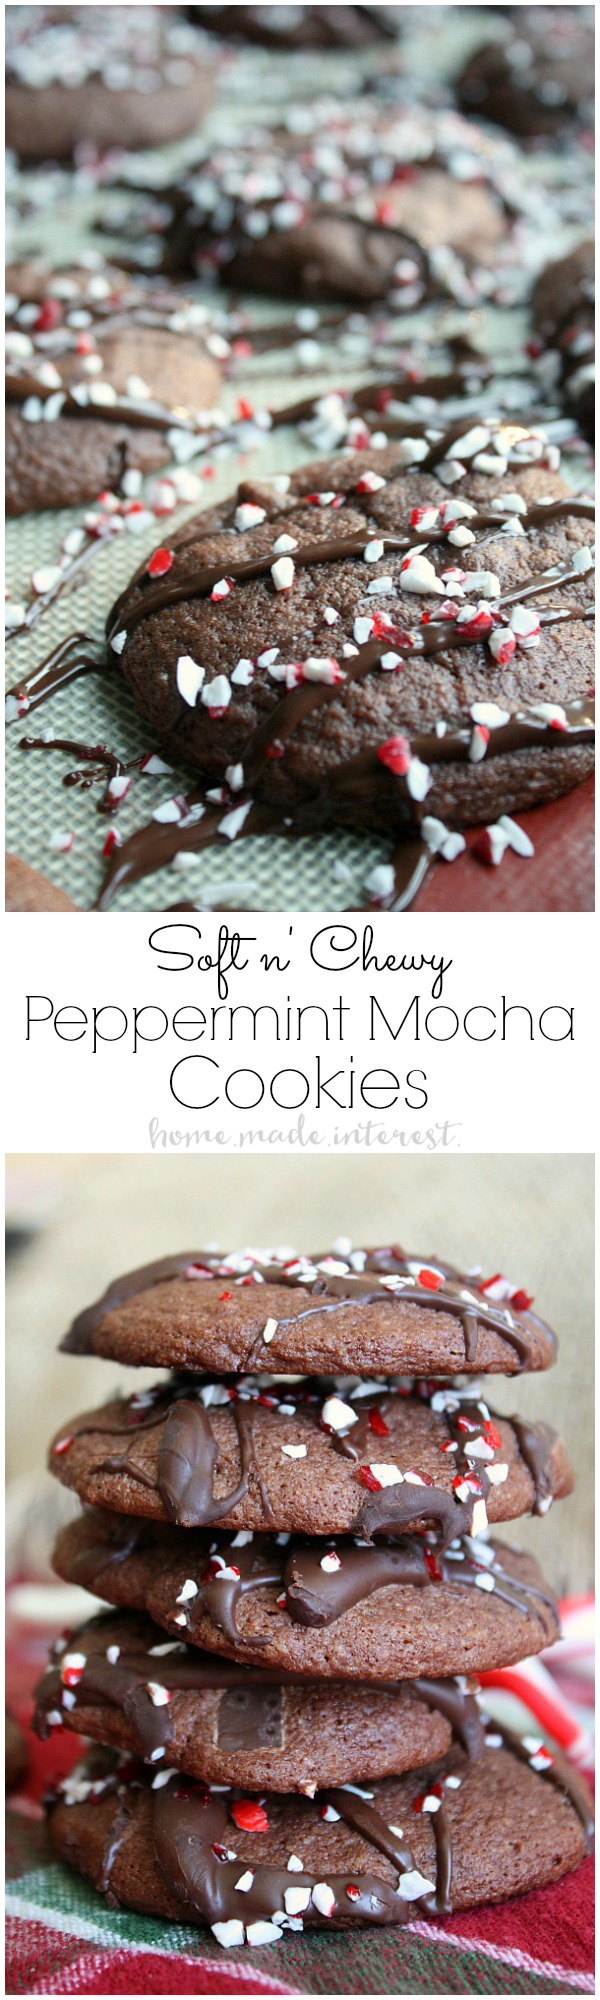 Soft and chewy peppermint mocha cookies